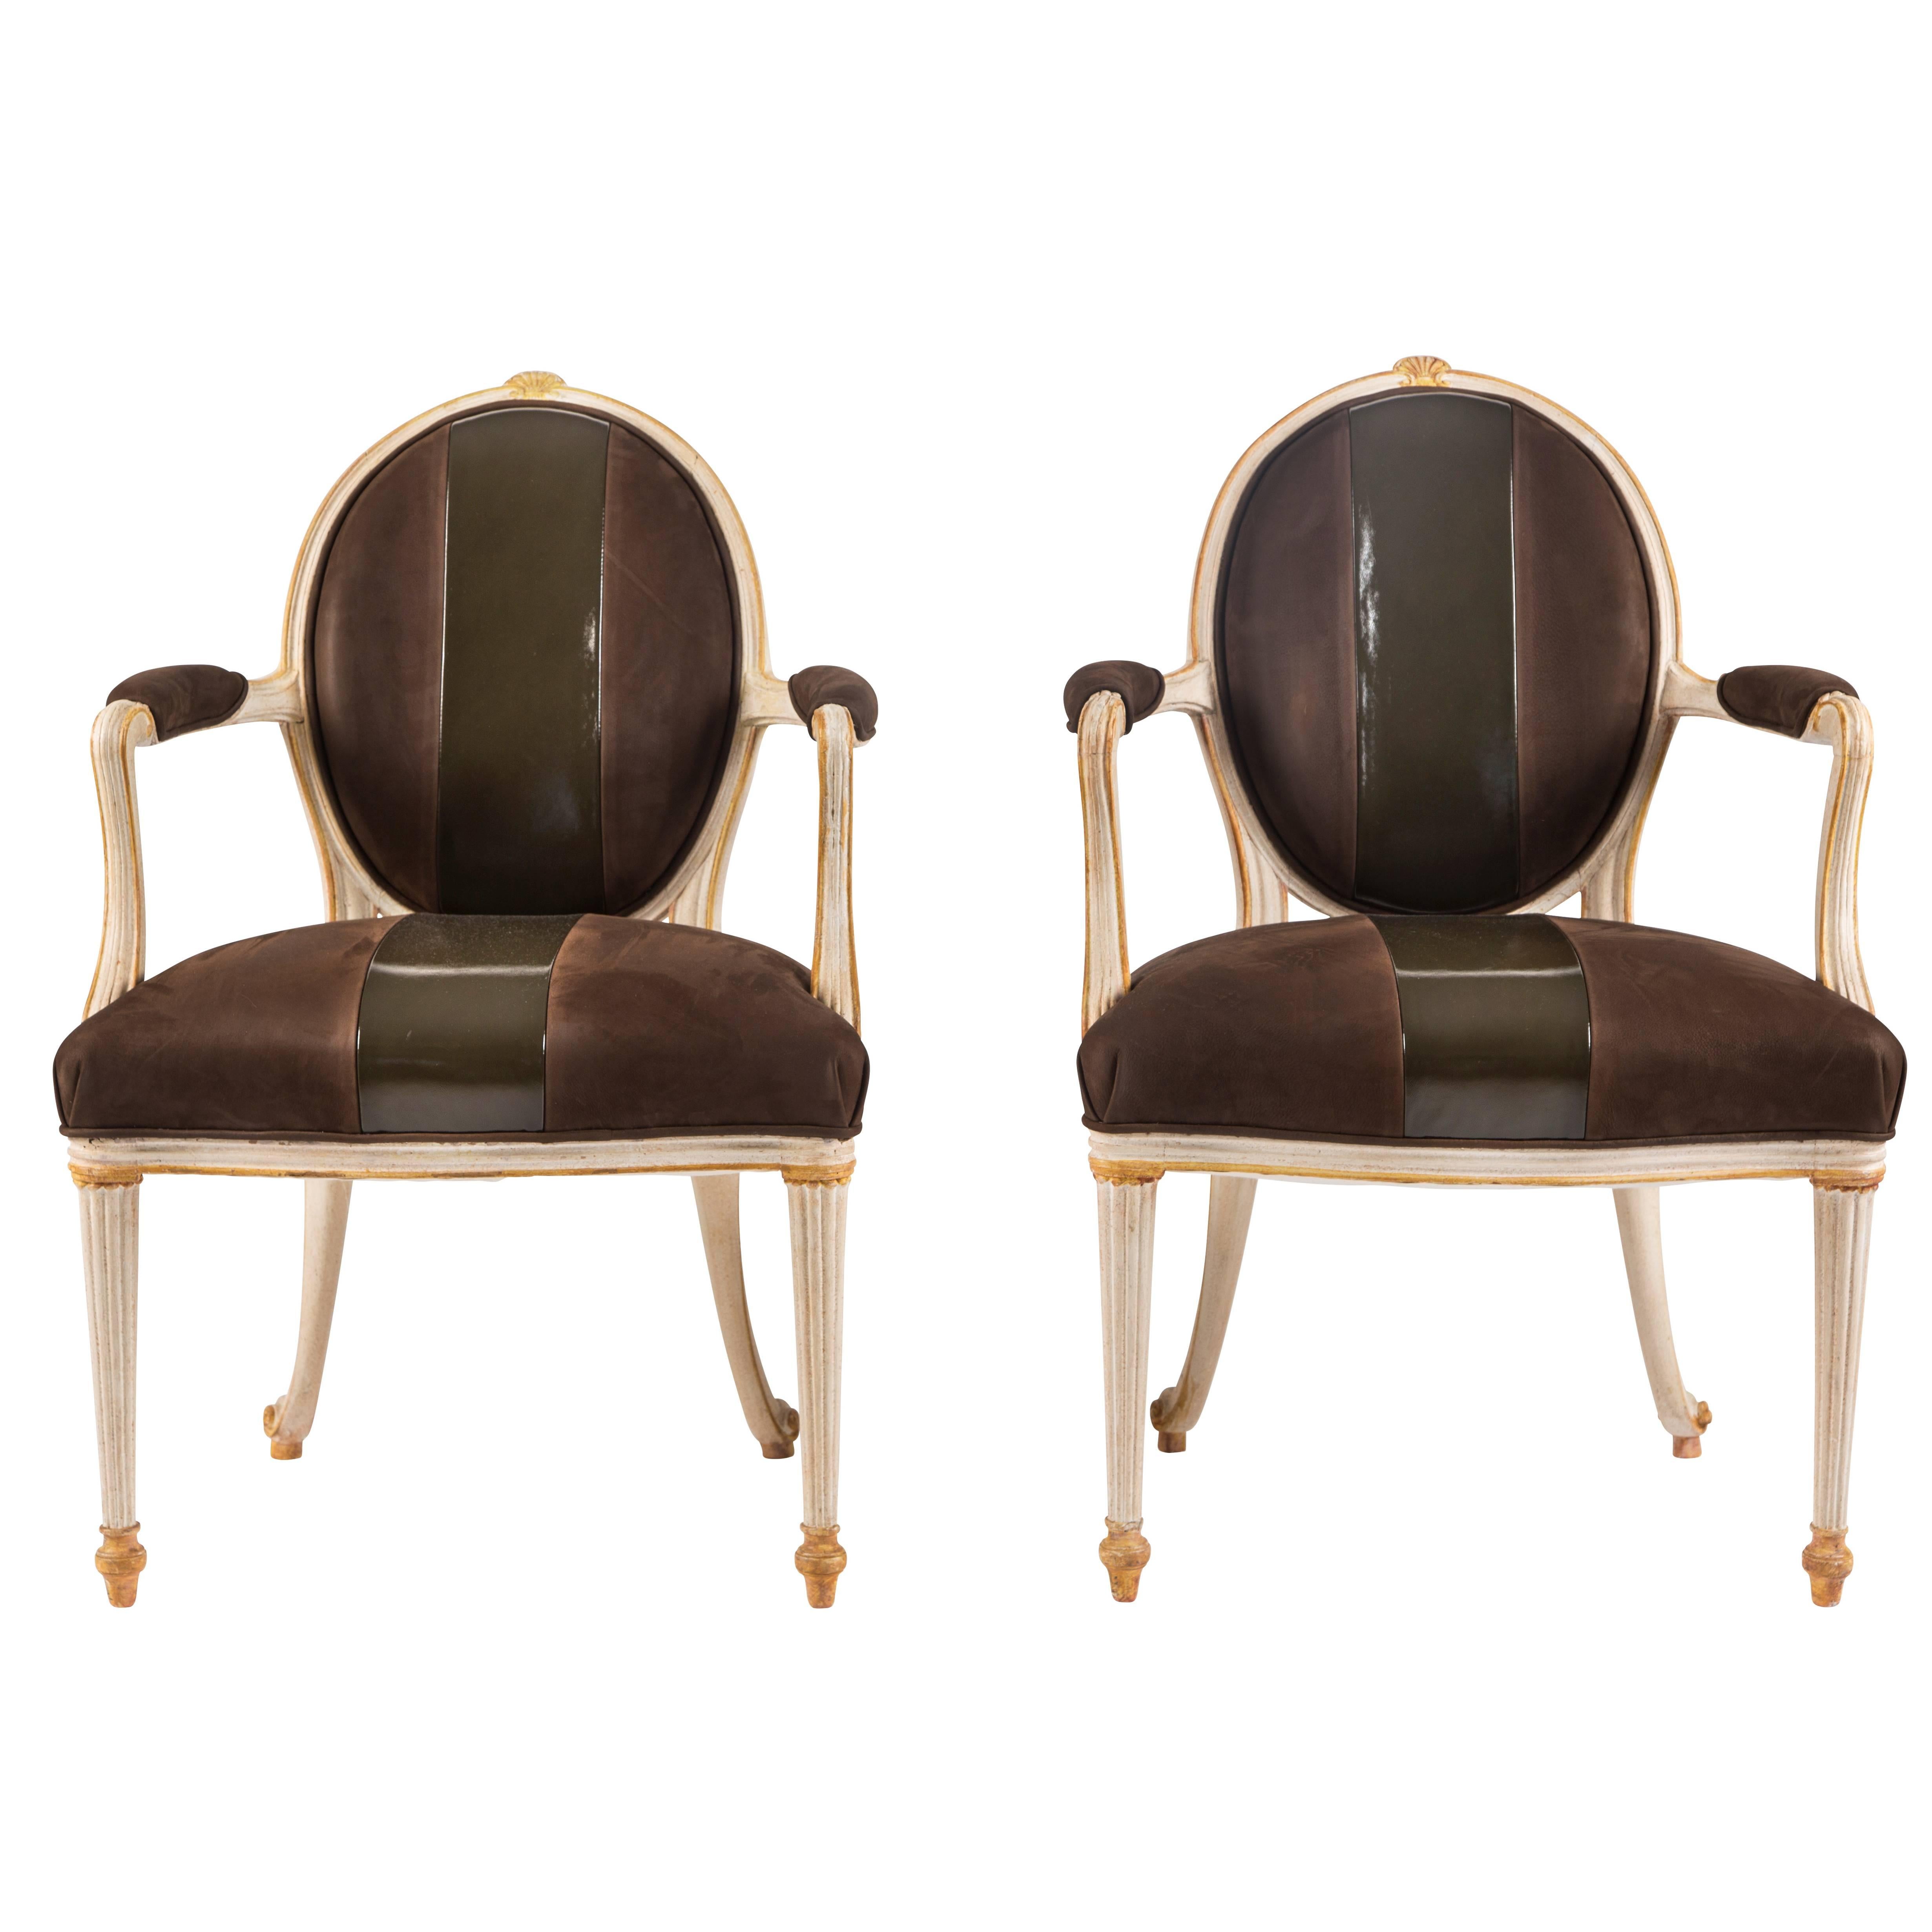 Pair of Leather Upholstered Fauteuils by William "Billy" Haines